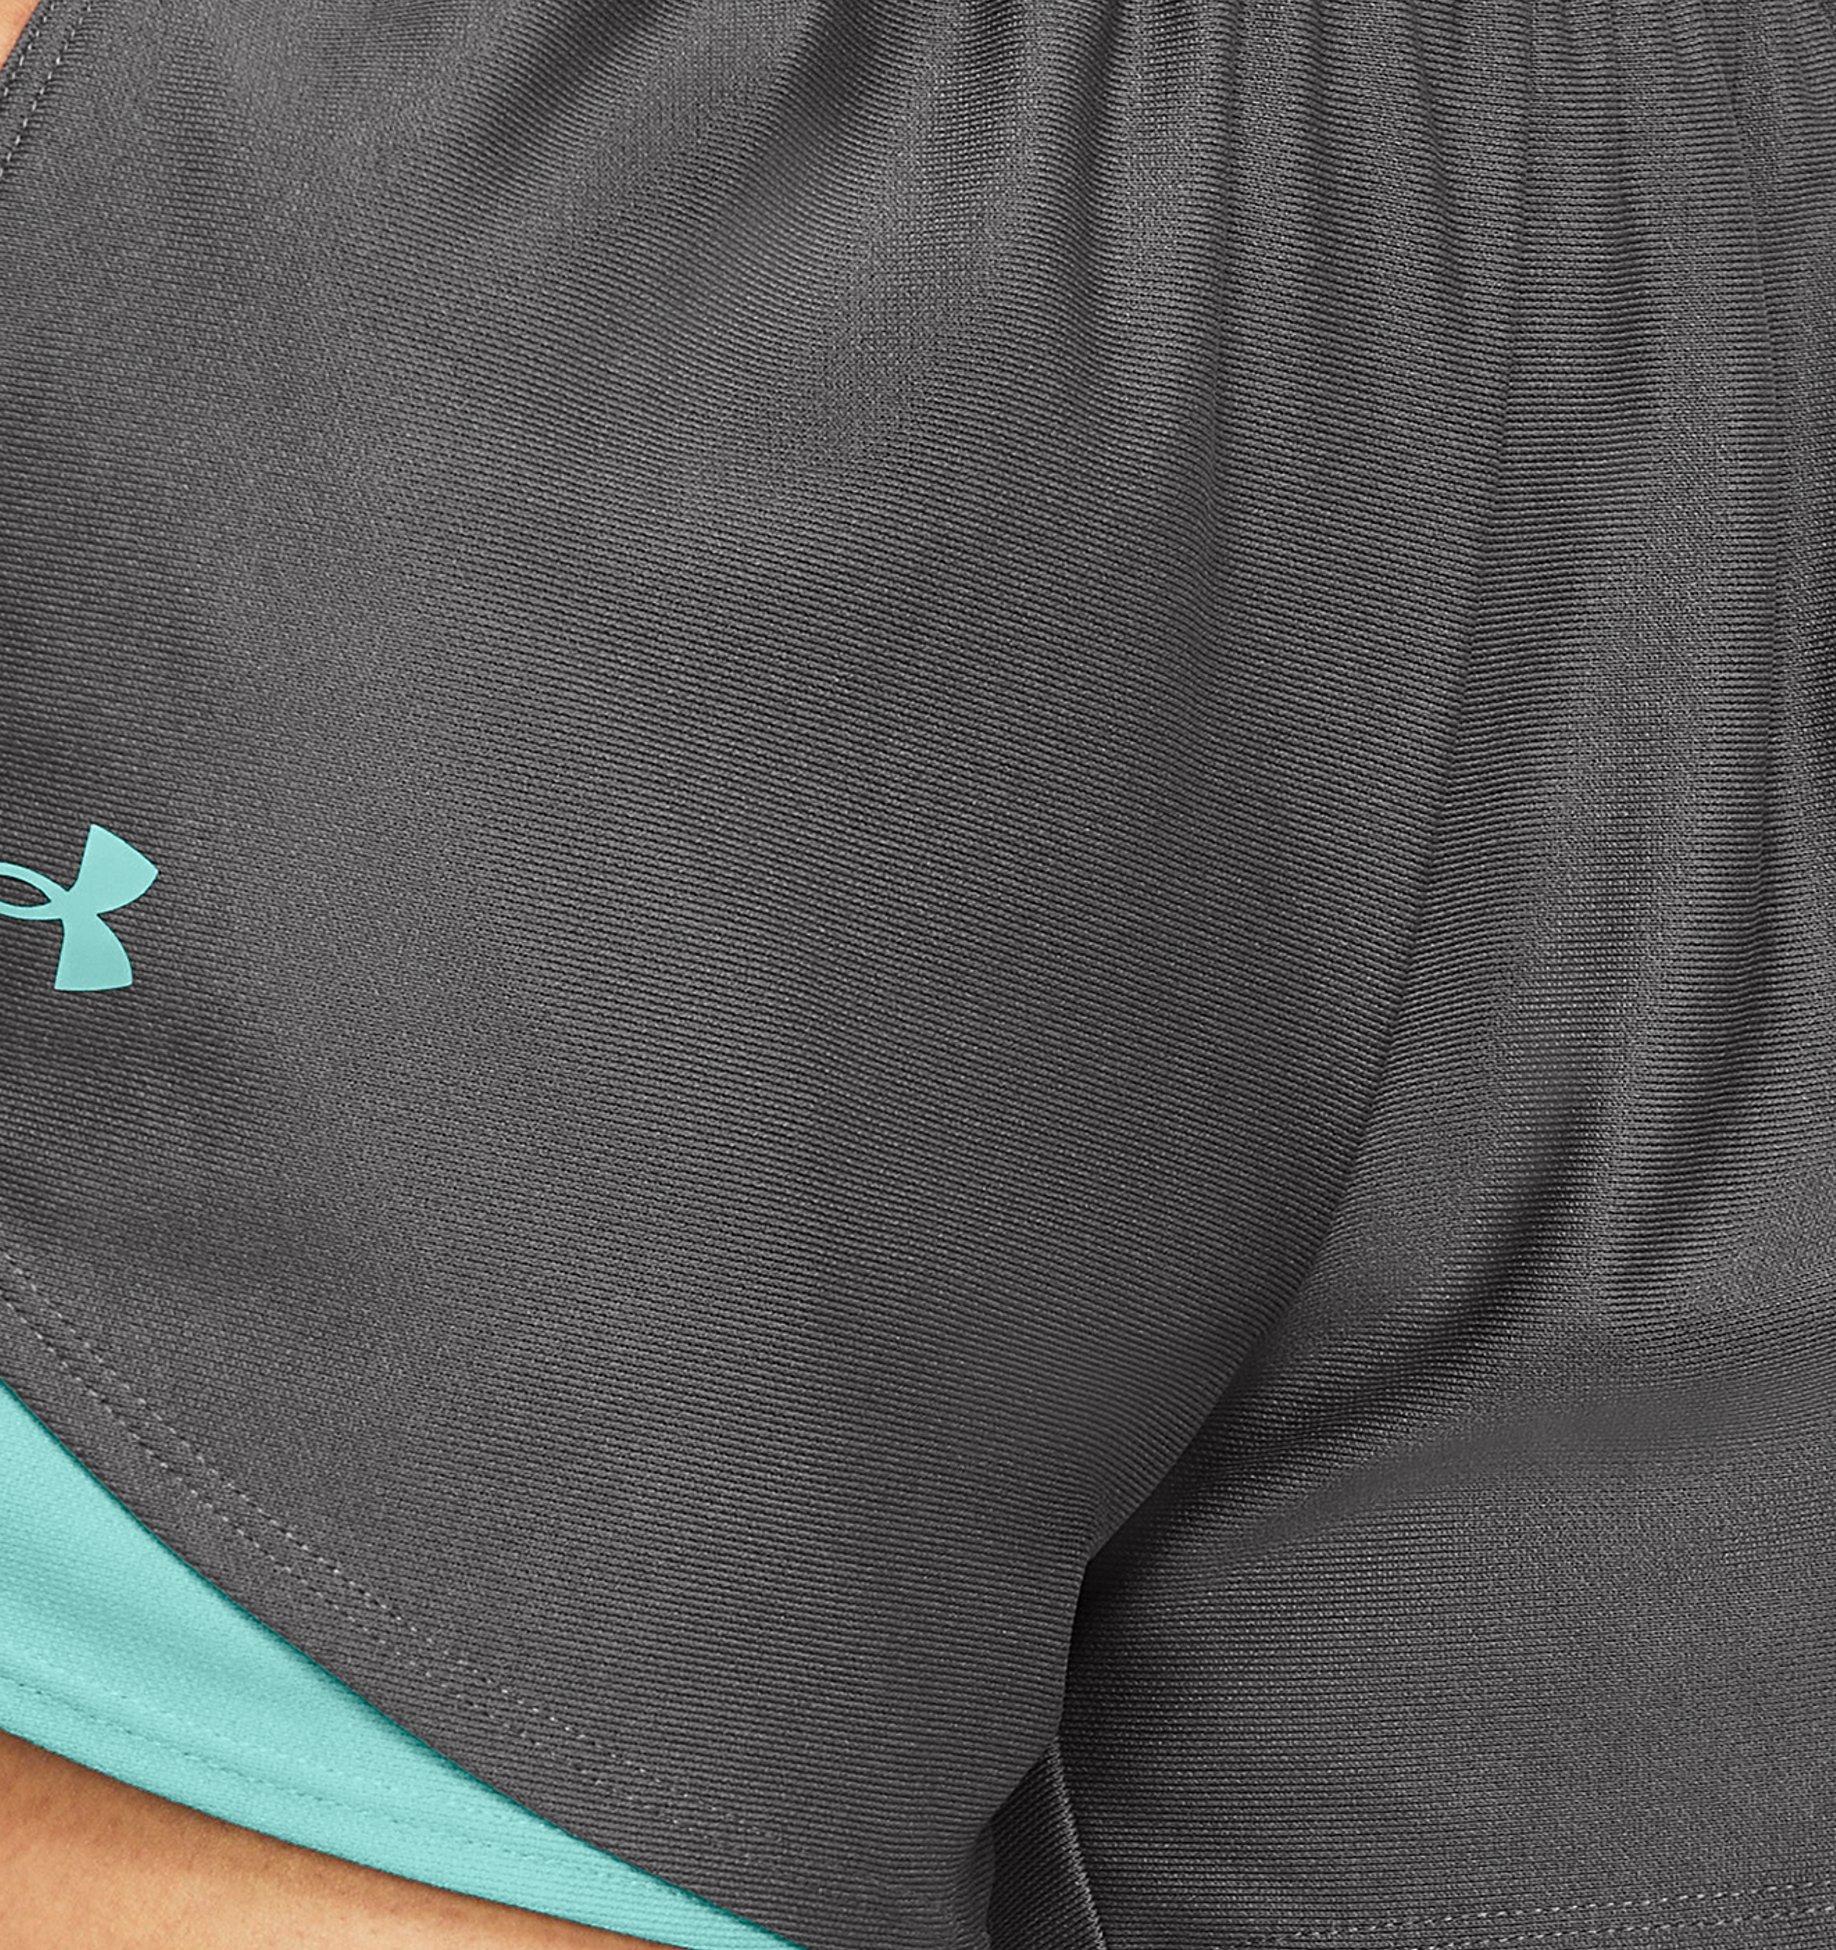 Short Entrenamiento Mujer Under Armour Play Up Shorts 3.0 Gris